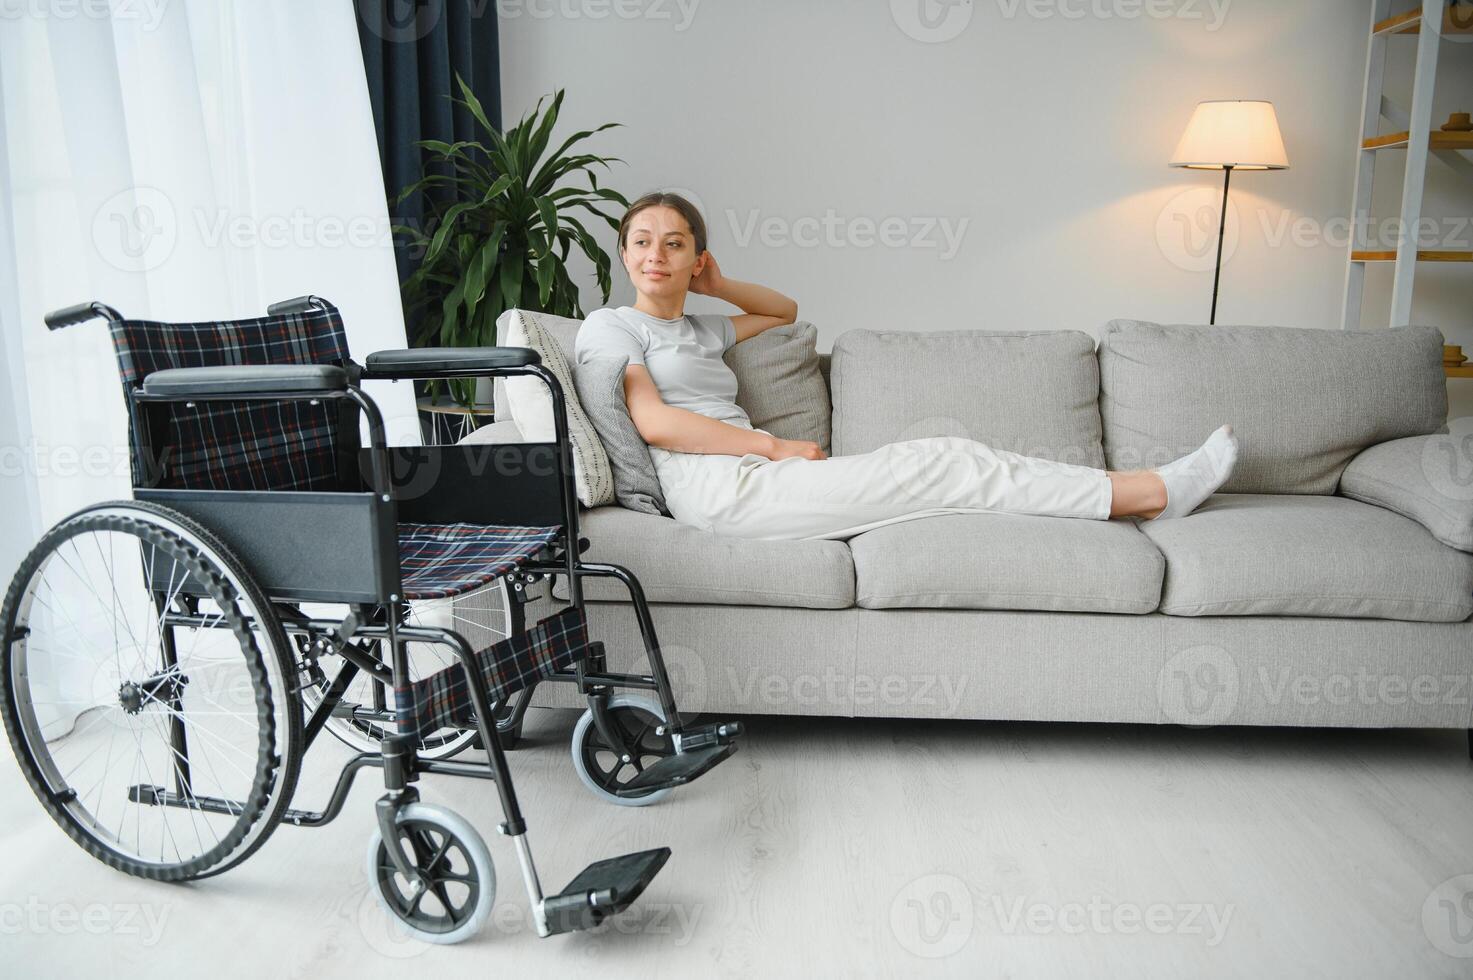 woman trying to sit down in wheelchair from couch photo